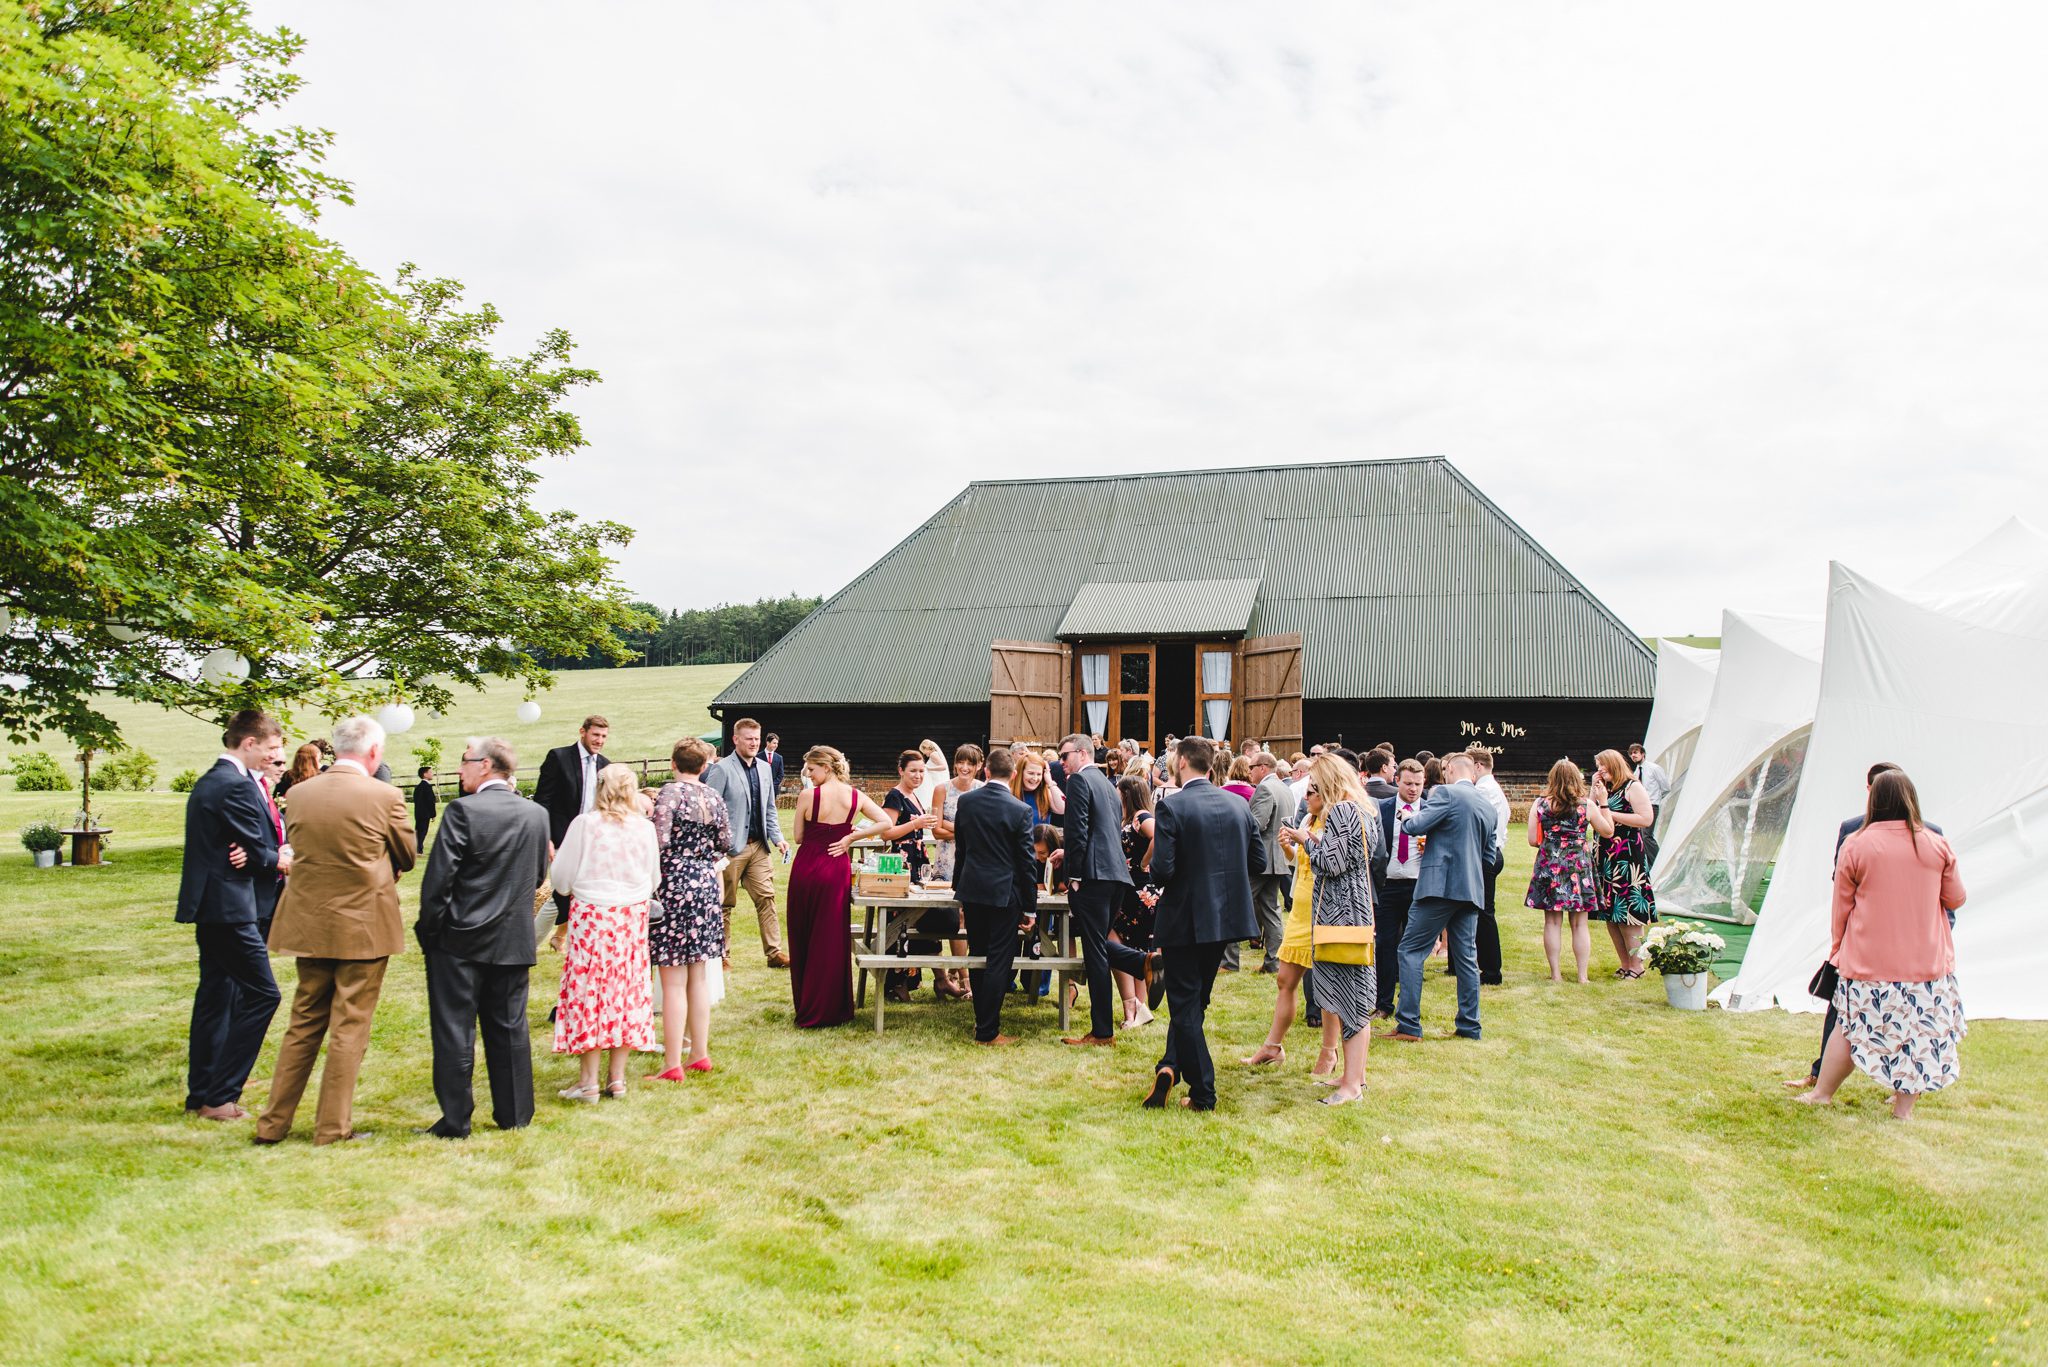 Cold Harbour Barn candid photography at a wedding